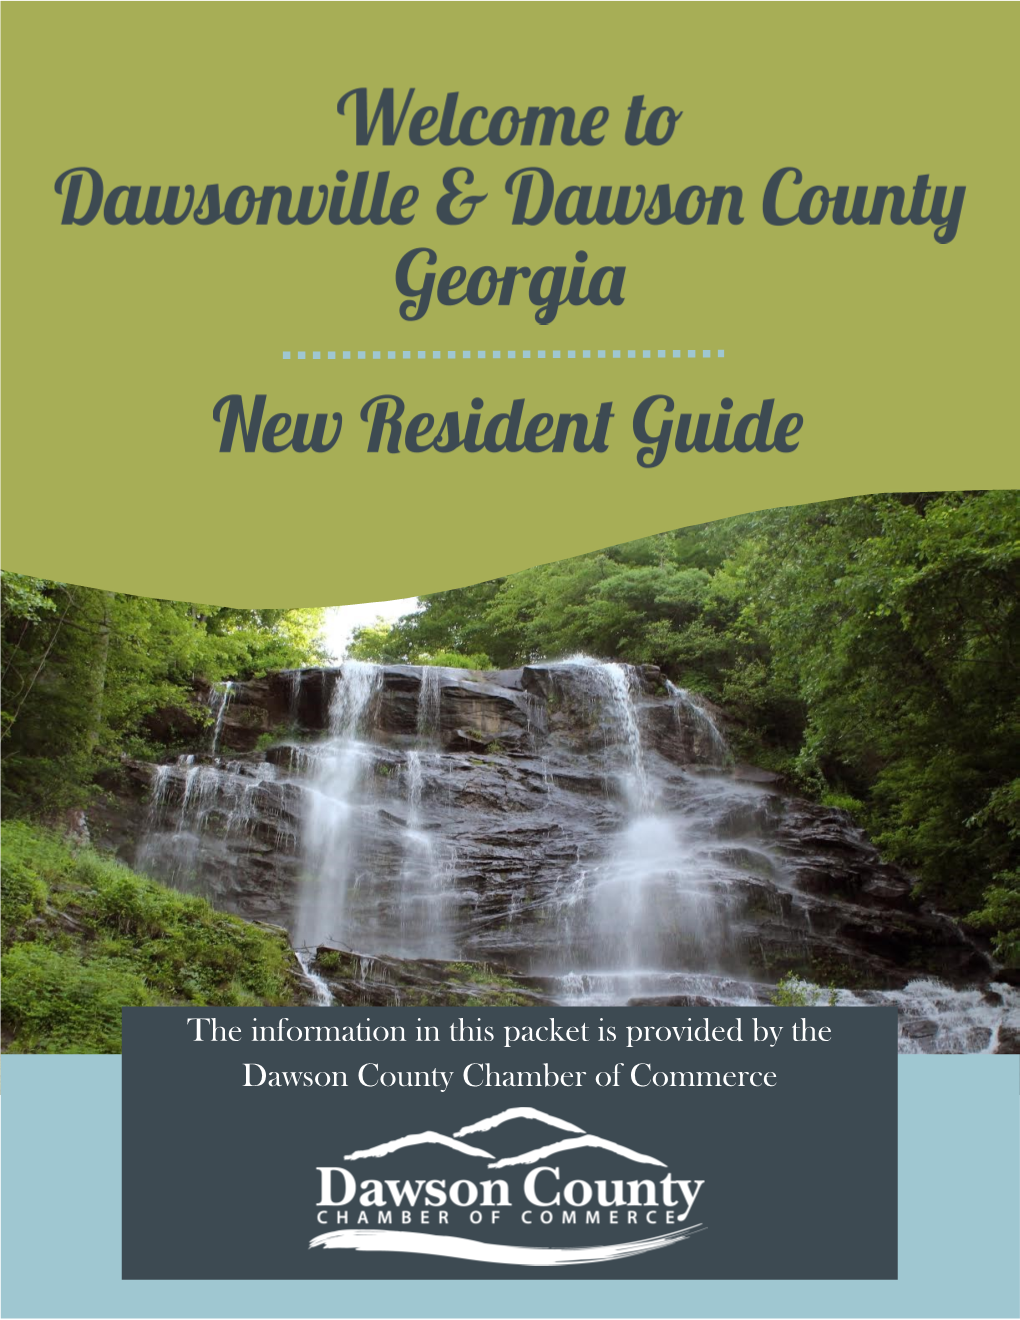 The Information in This Packet Is Provided by the Dawson County Chamber of Commerce